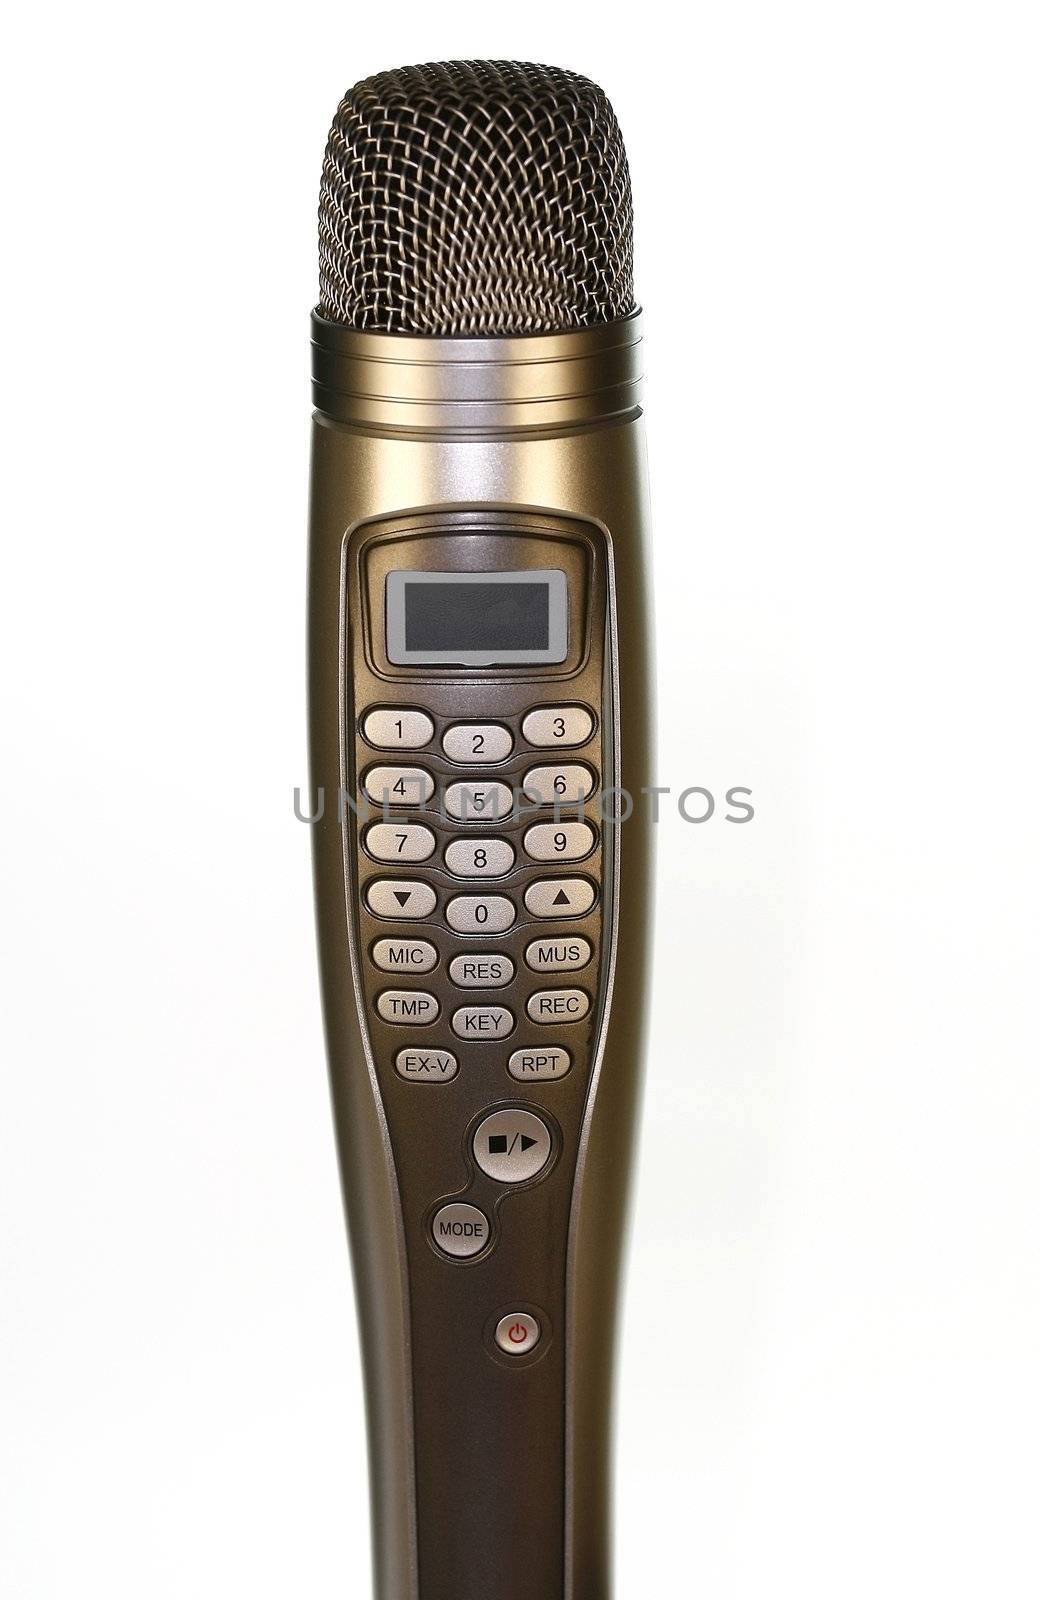 Latest Karaoke Microphone with buttons for song selection